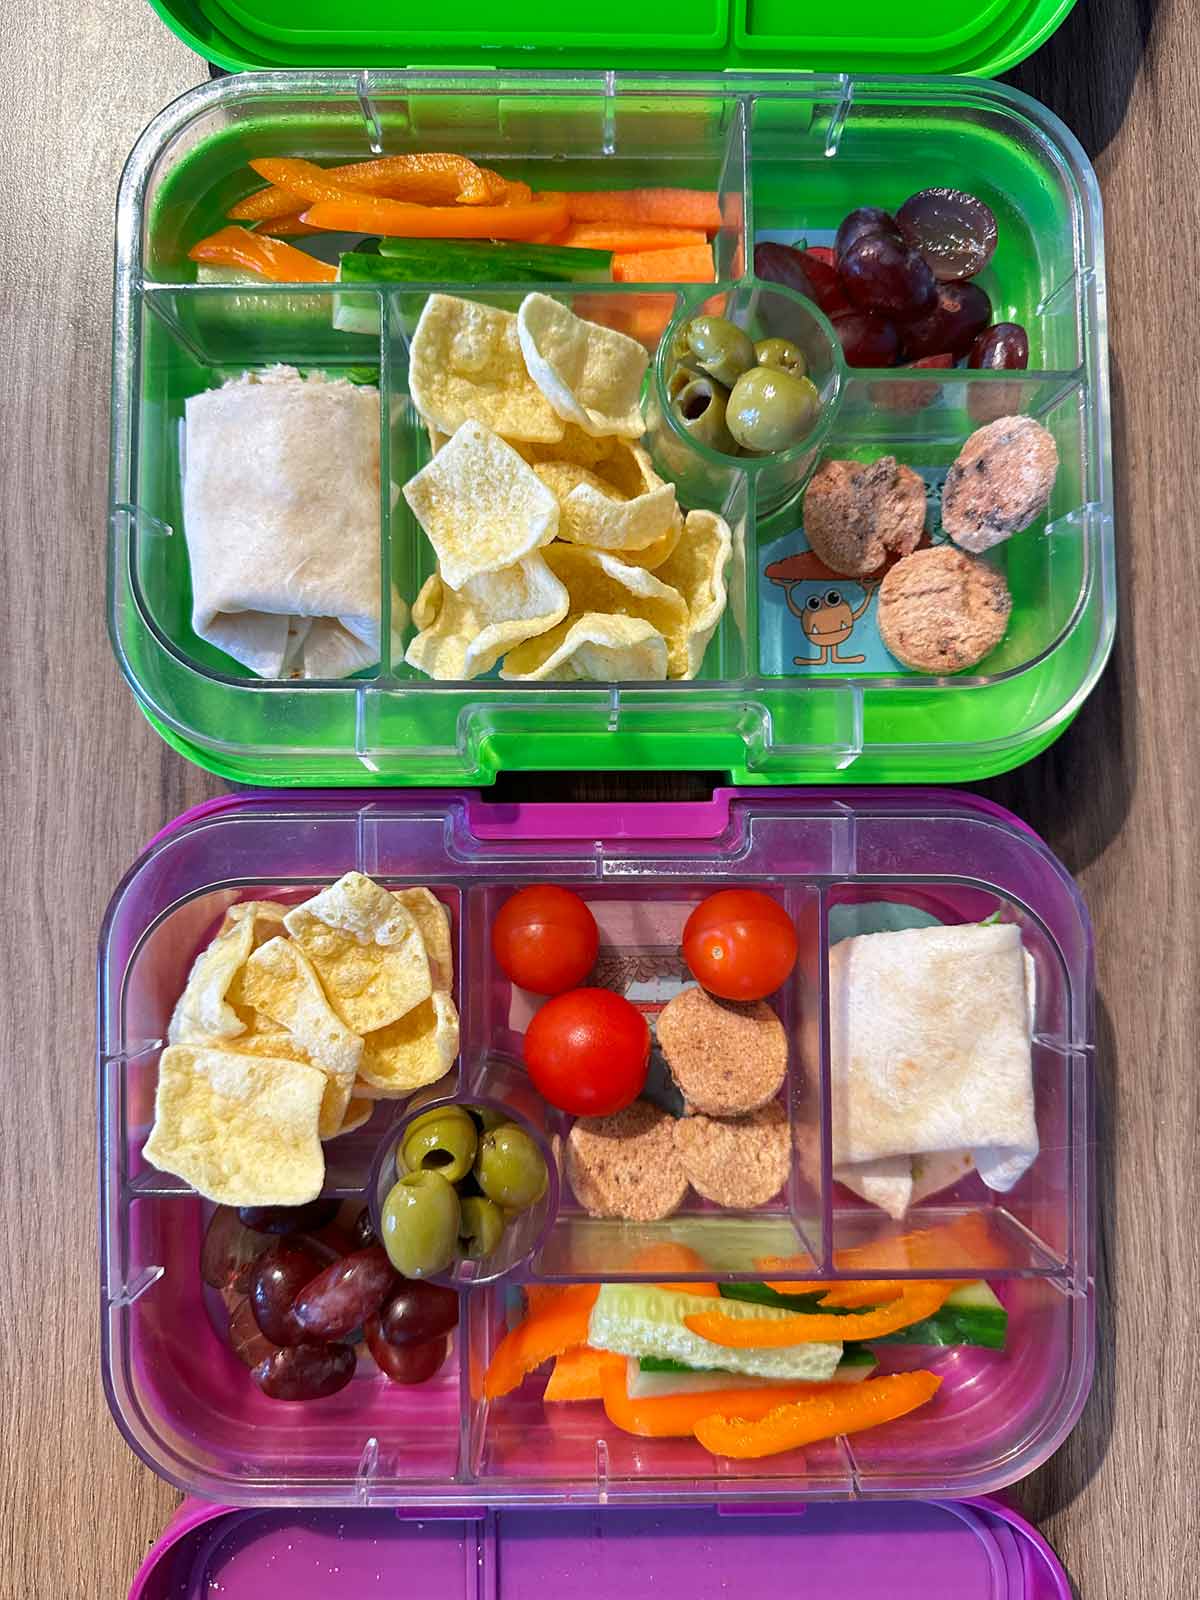 Two child's bento boxes, one purple, one green, both filled with fruit, vegetables, a wrap and mini cookies.